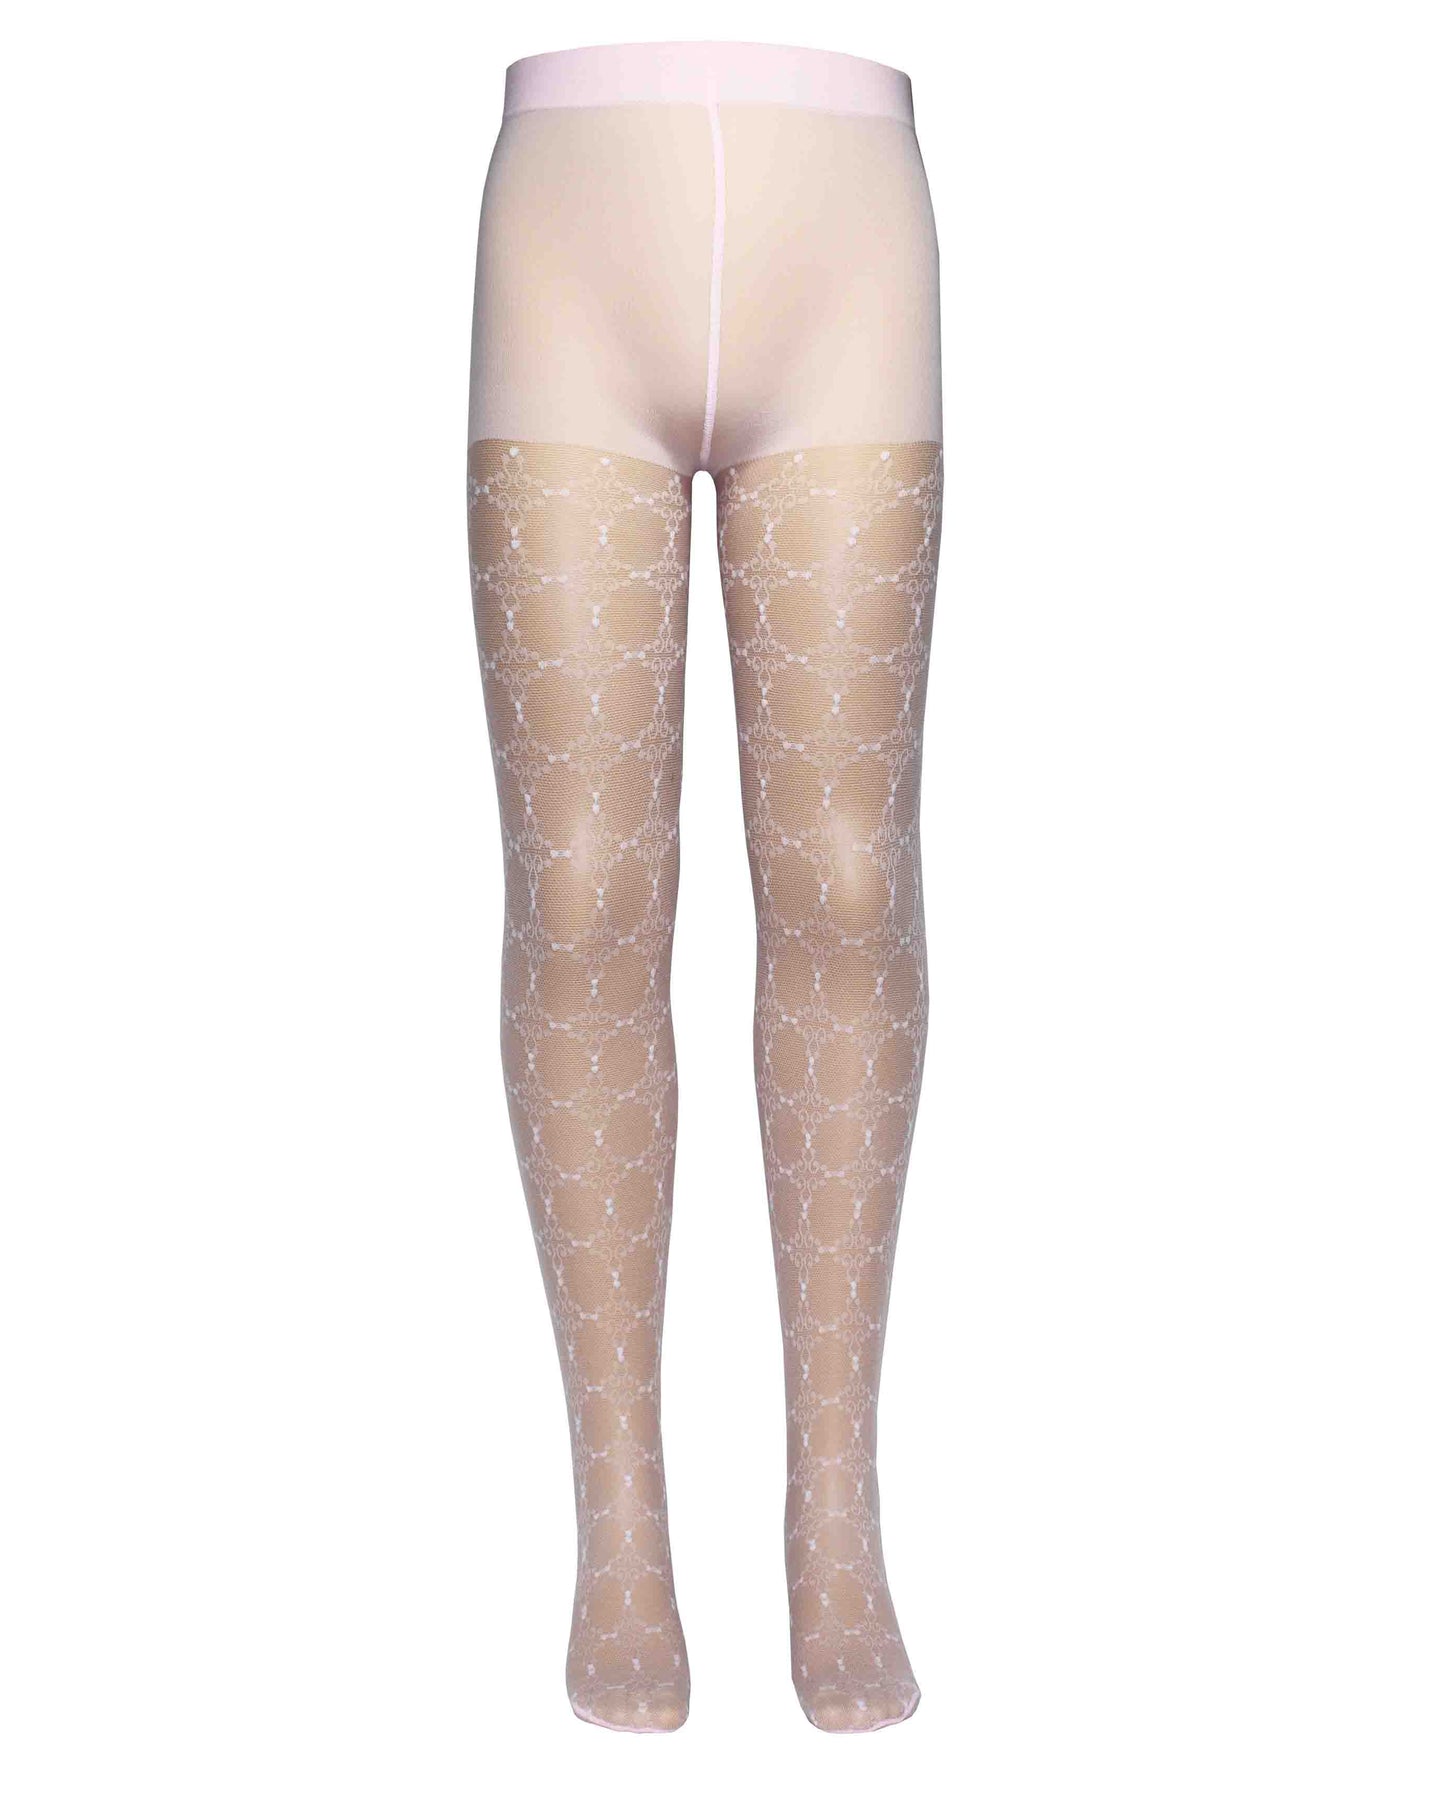 Omsa Serenella Decor Collant - Baby pink / rosa semi sheer micro mesh children's fashion tights with a woven lace style grid pattern with white dots.